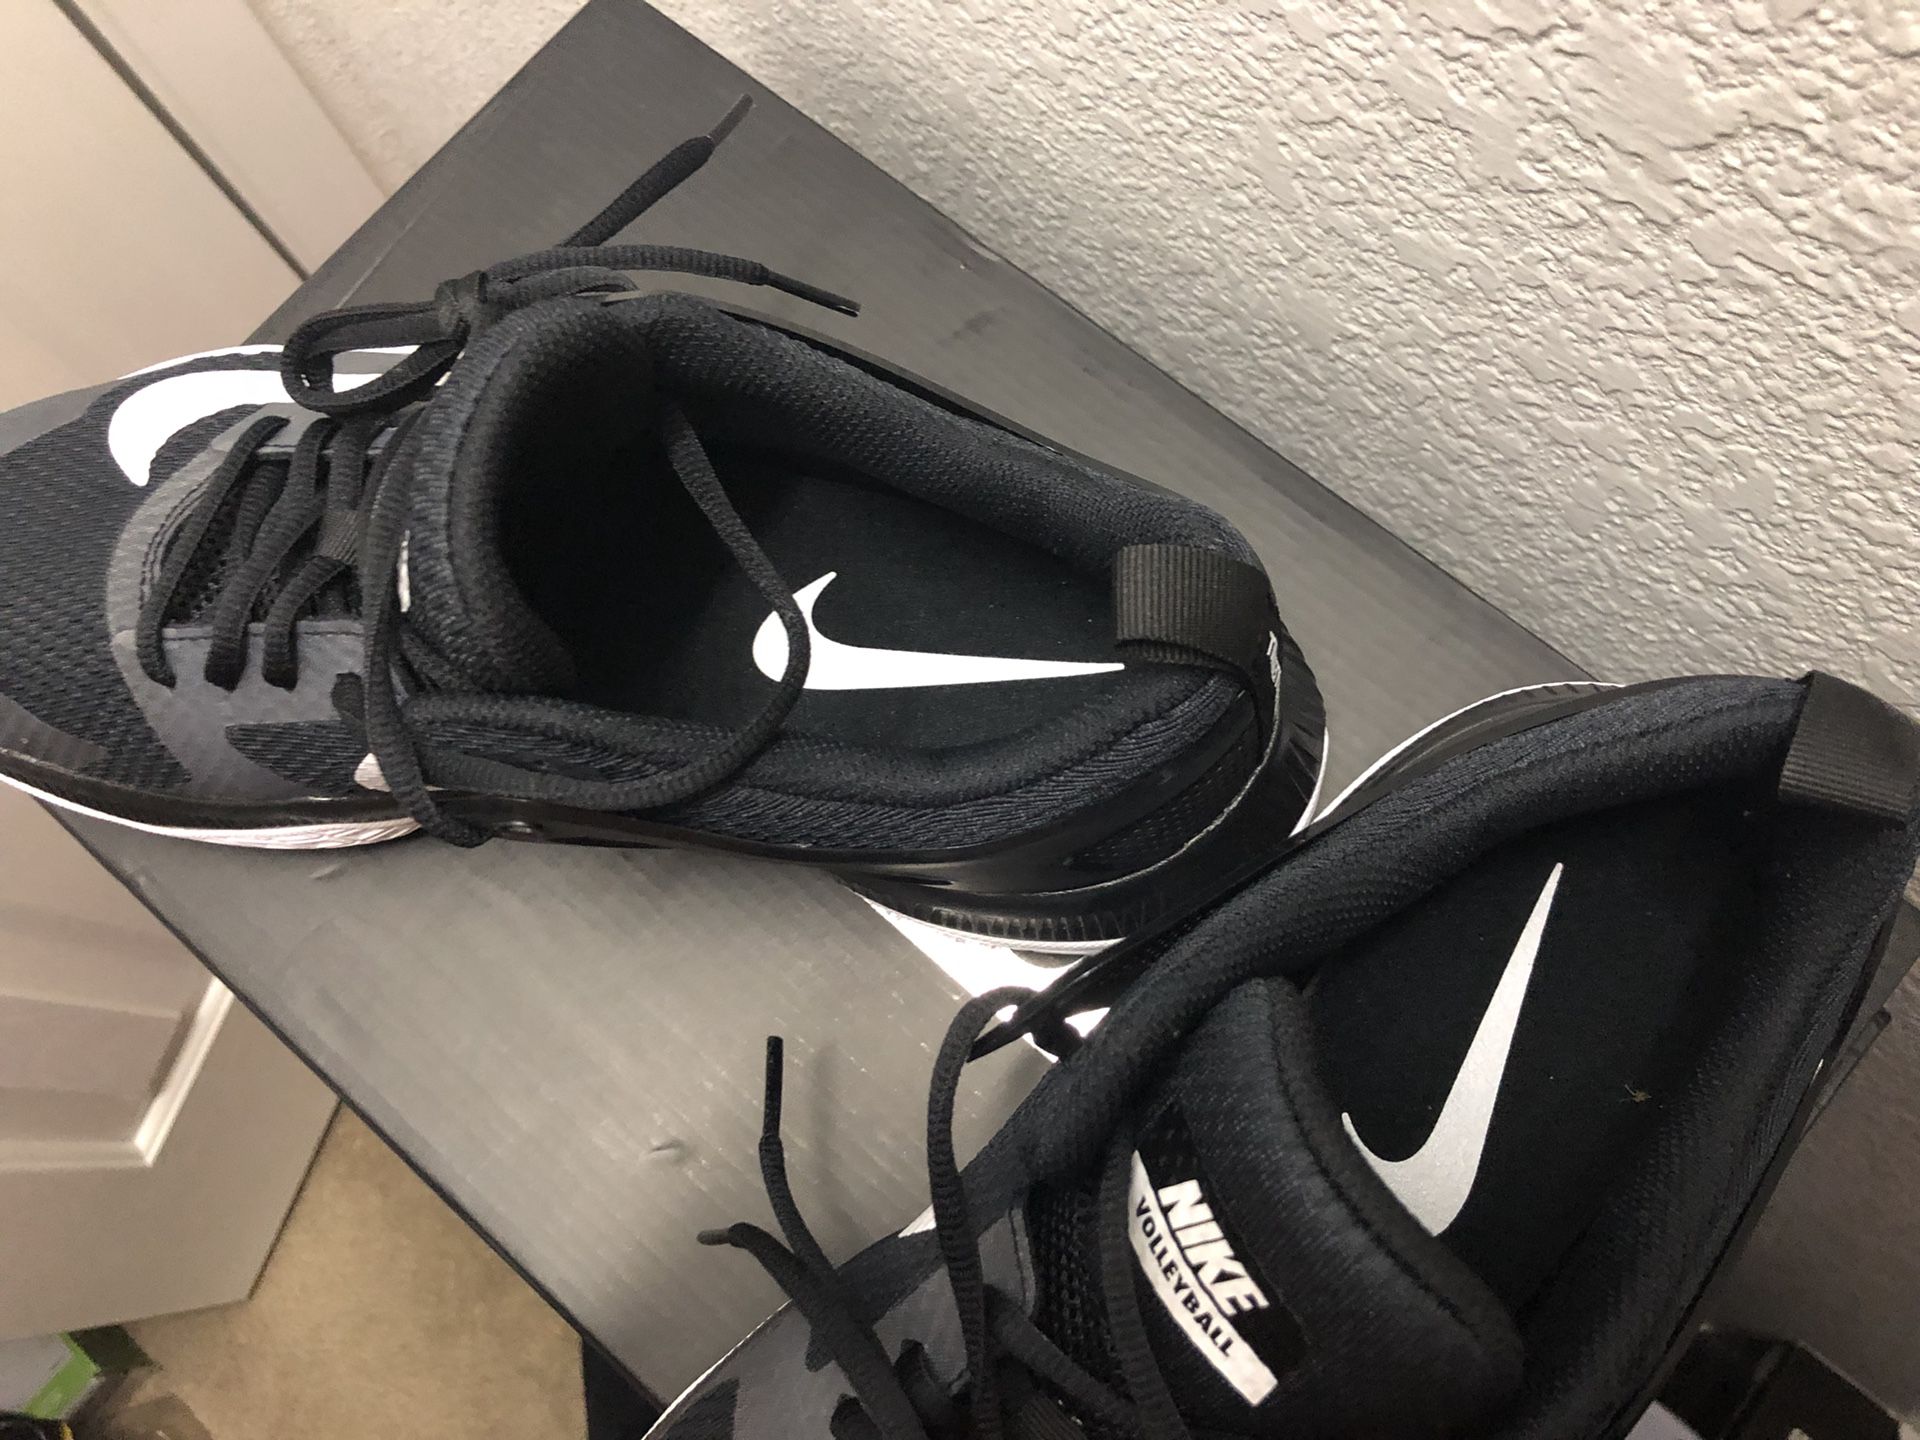 NIKE Womens Nike Air HyperAce Volleyball Shoes Size 11.5 Black 902367-001 for Sale in Lancaster, TX - OfferUp